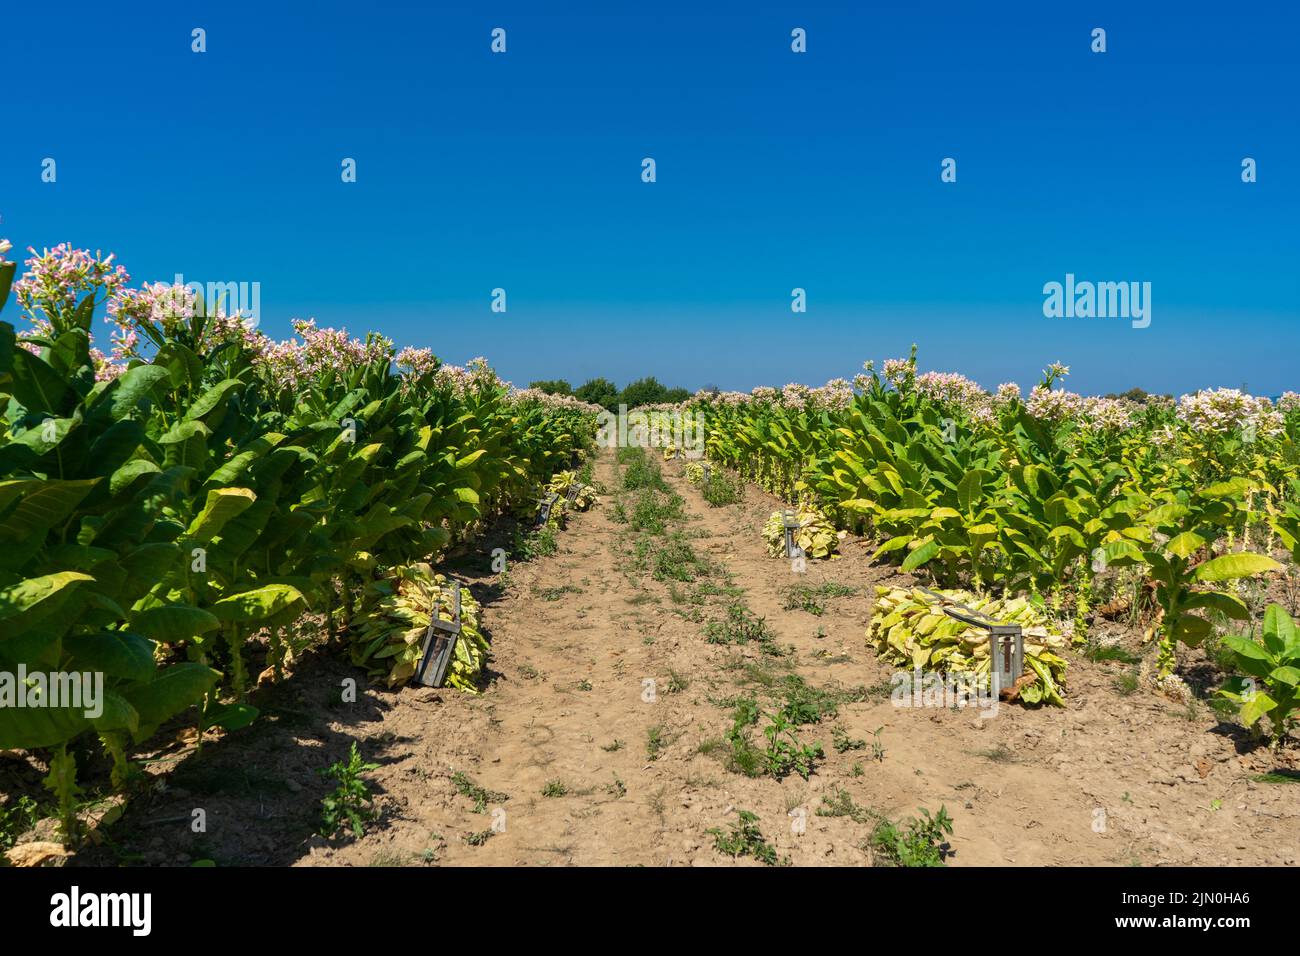 Tobacco plantation by agriculturist in village farm with beautiful blue sky Stock Photo